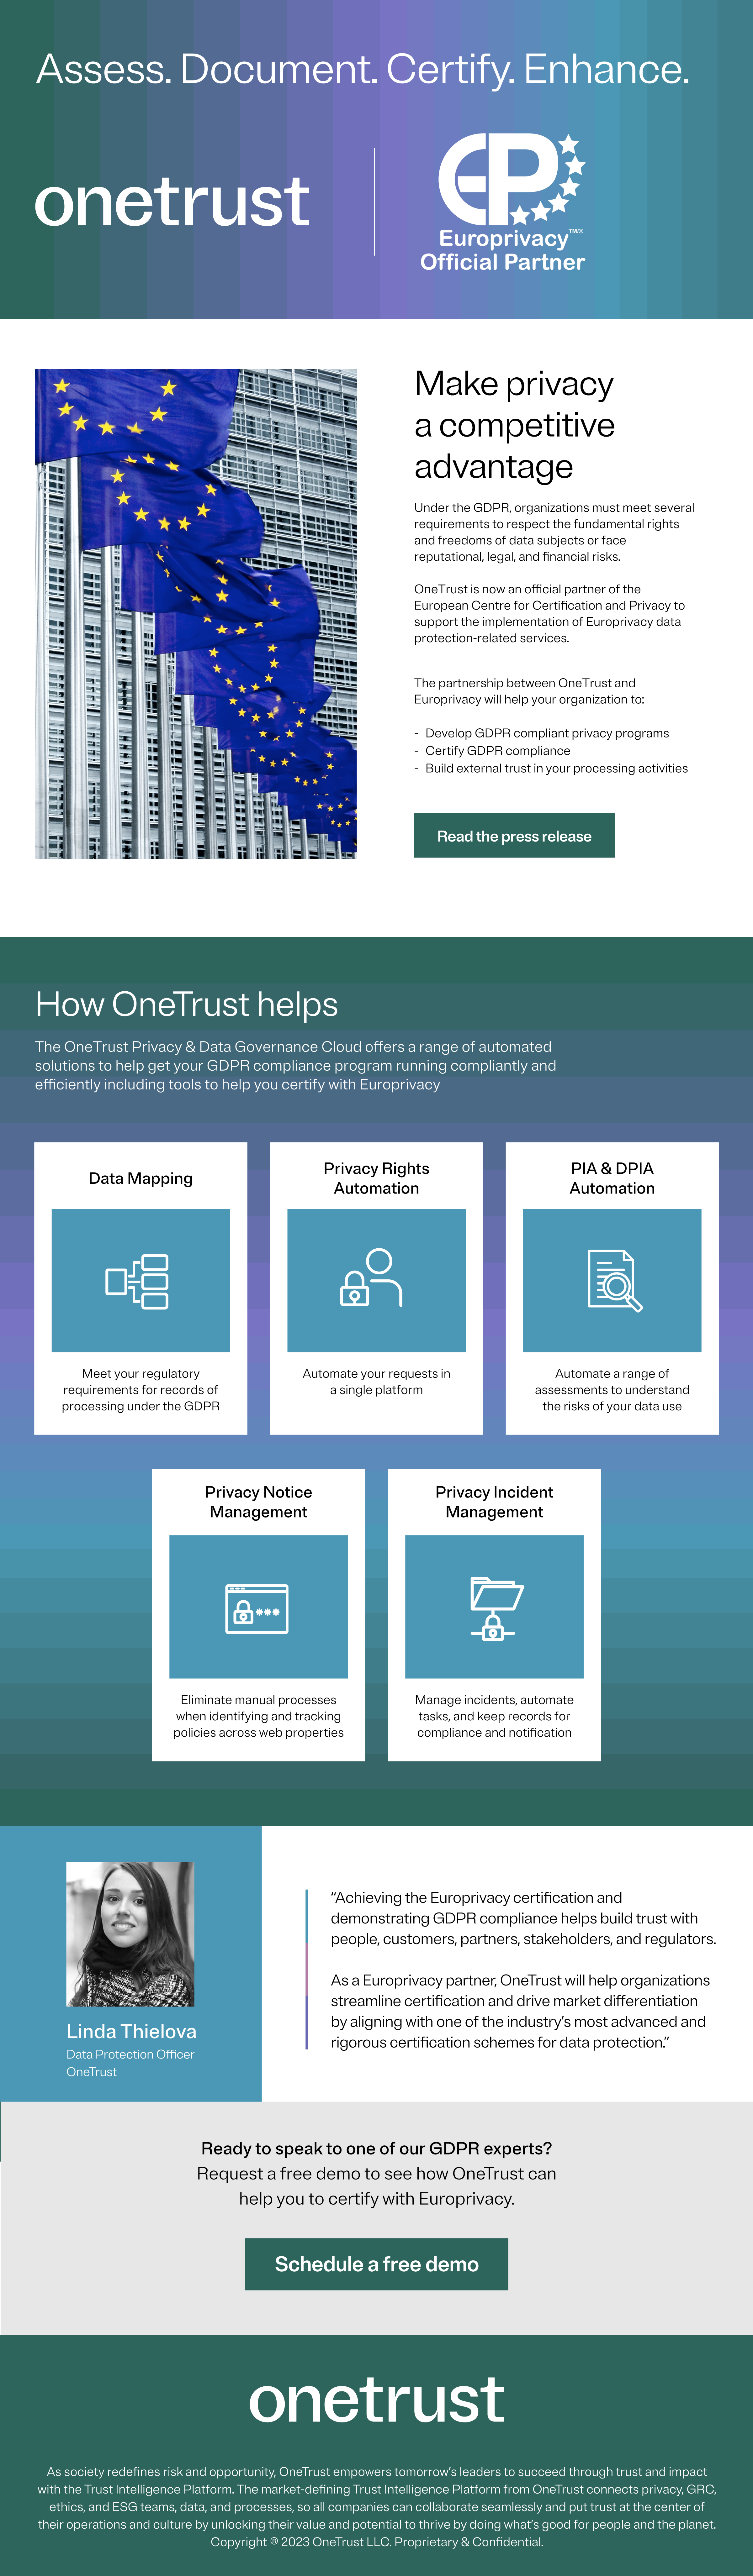 Infographic detailing the partnership between OneTrust and Europrivacy